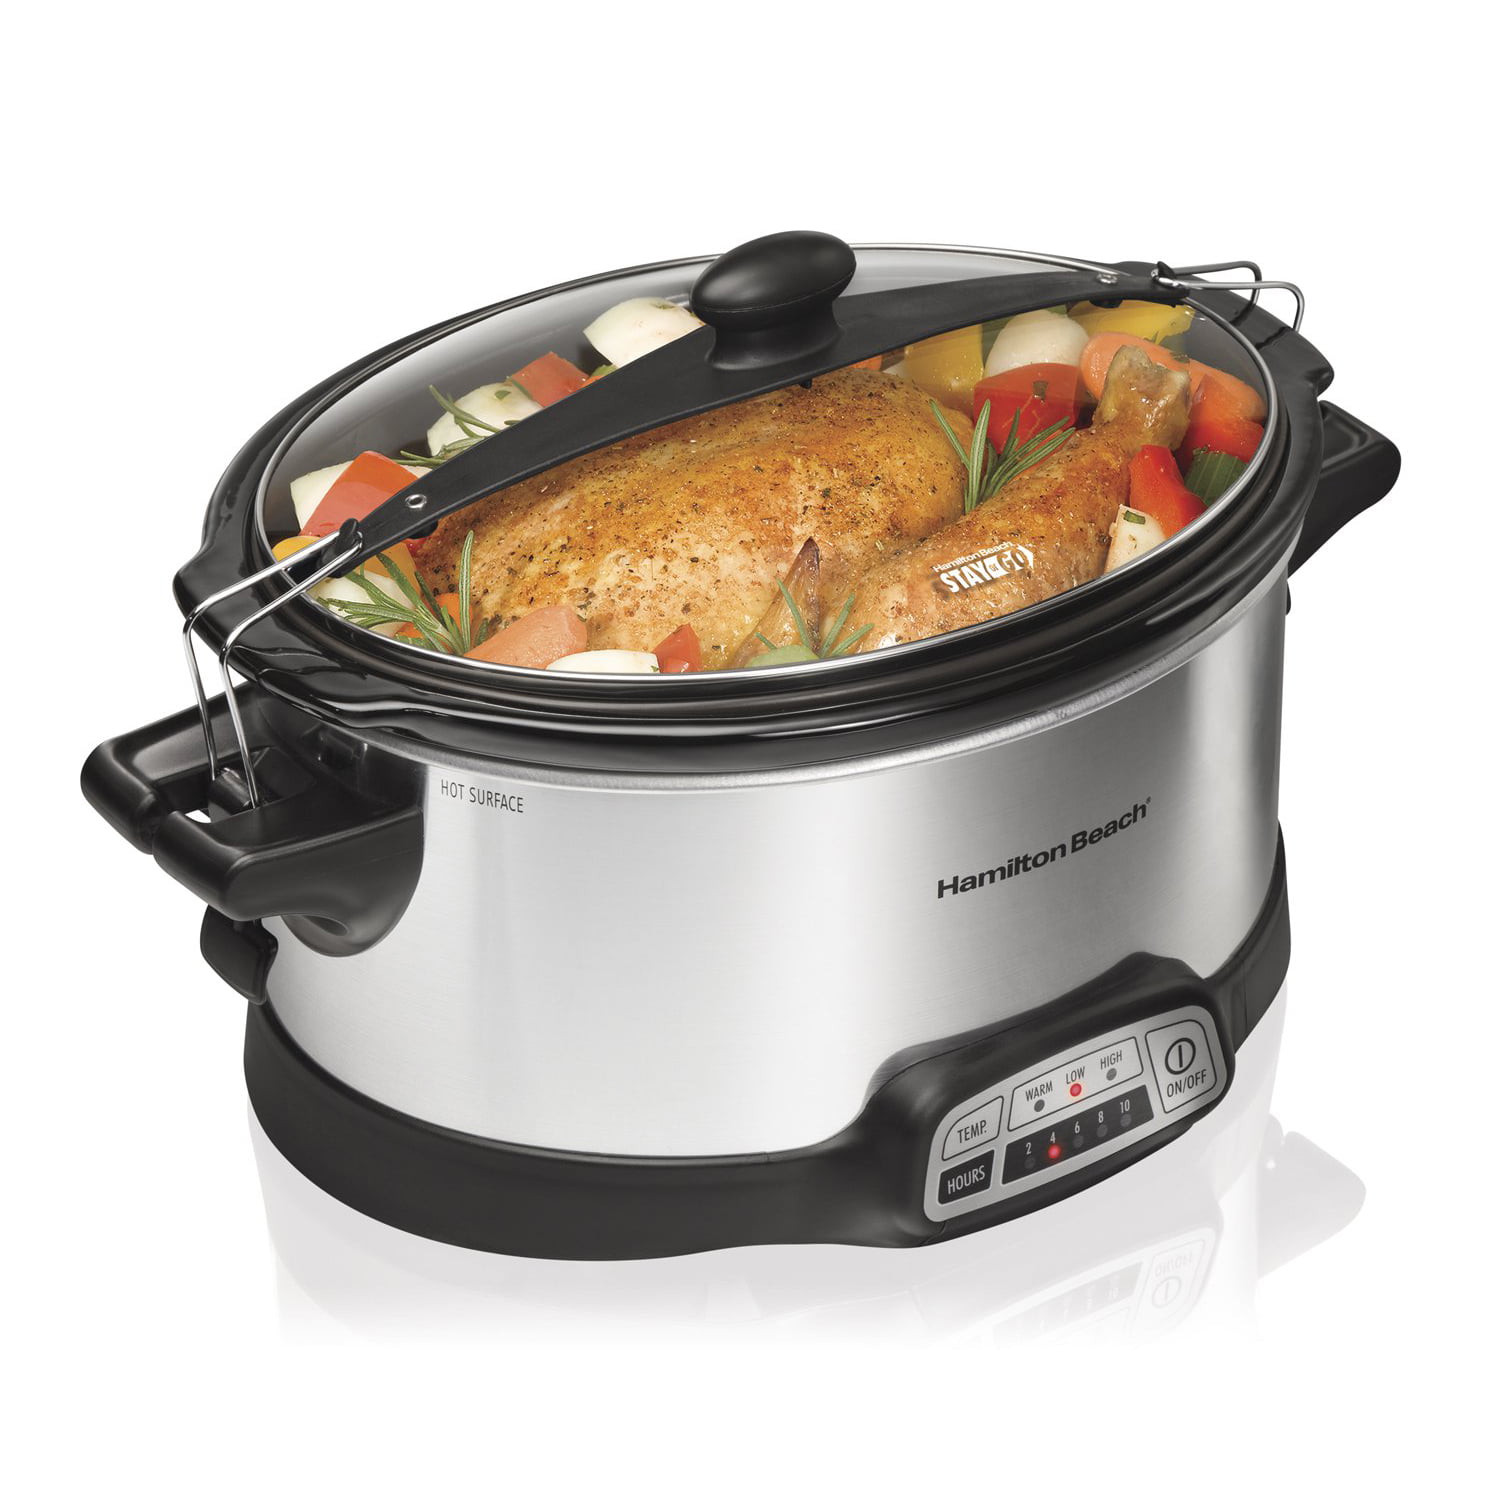  Hamilton Beach Stay or Go Portable 6-Quart Slow Cooker With Lid  Lock, Dishwasher-Safe Crock, Silver (33262): Crock Pot: Home & Kitchen